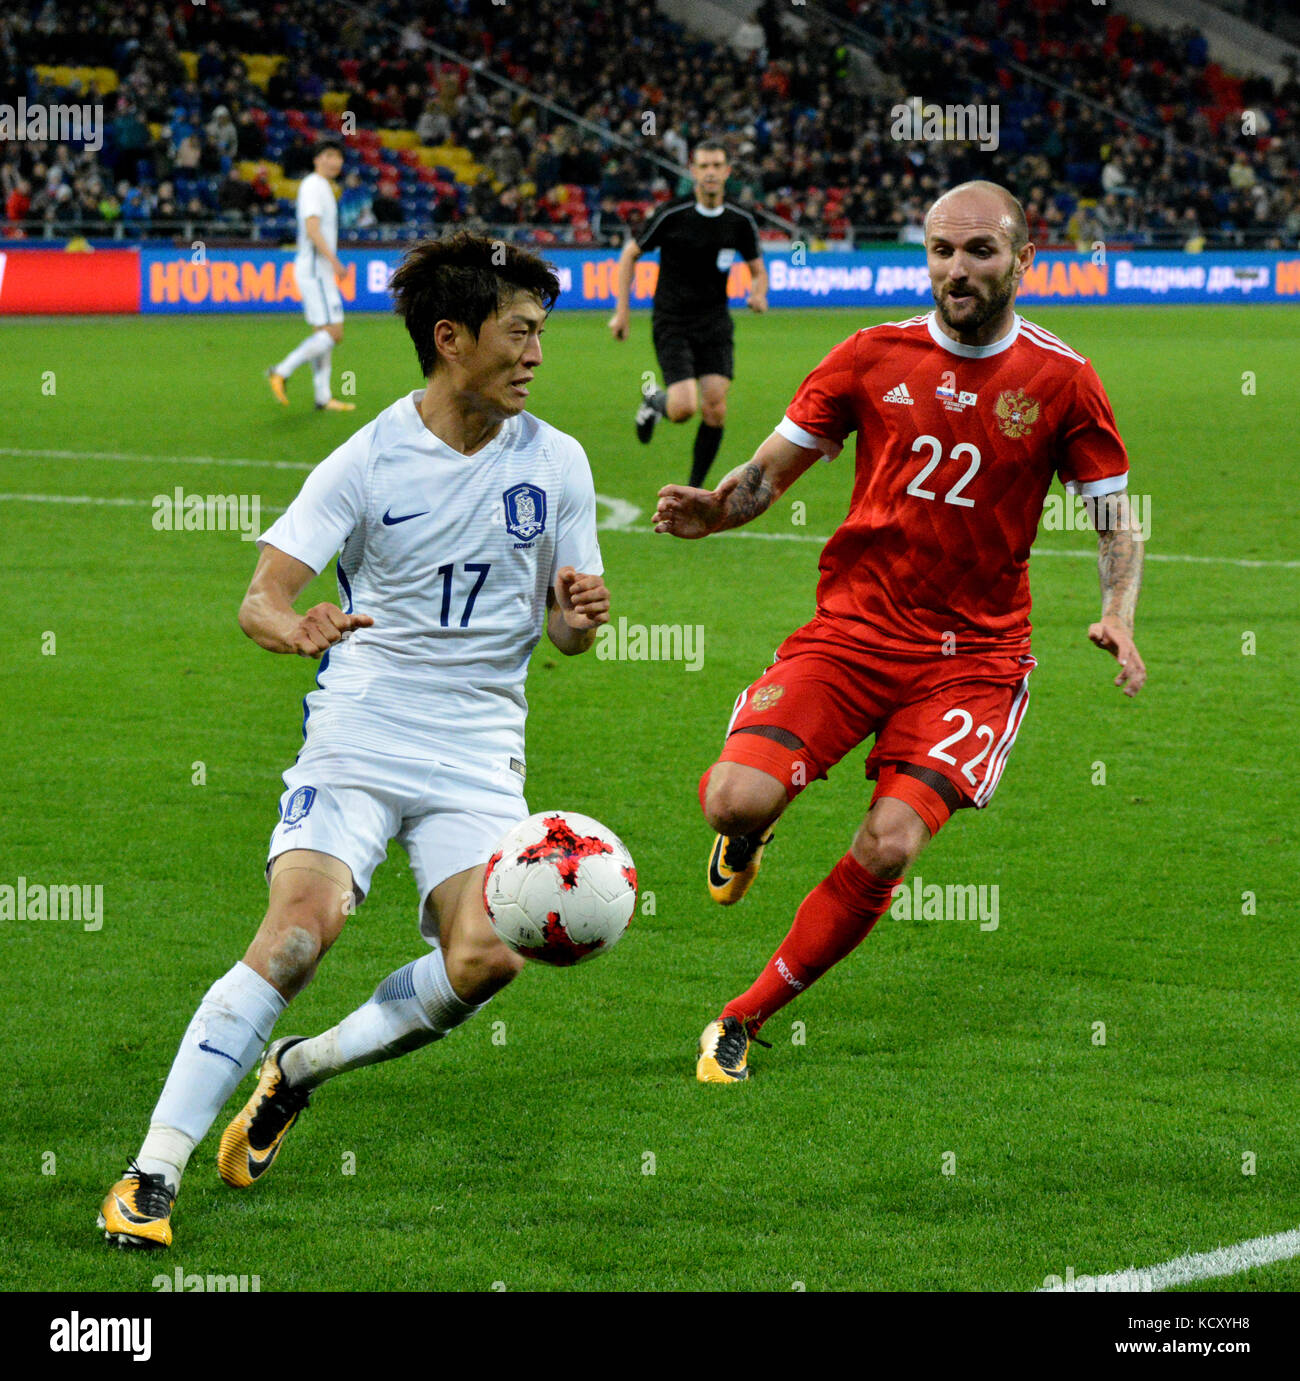 Moscow, Russia - October 7, 2017. Russian midfielder Konstantin Rausch and South Korean winger Chung-Yong Lee during international friendly match Russia vs South Korea at VEB Arena stadium in Moscow. Credit: Alizada Studios/Alamy Live News Stock Photo